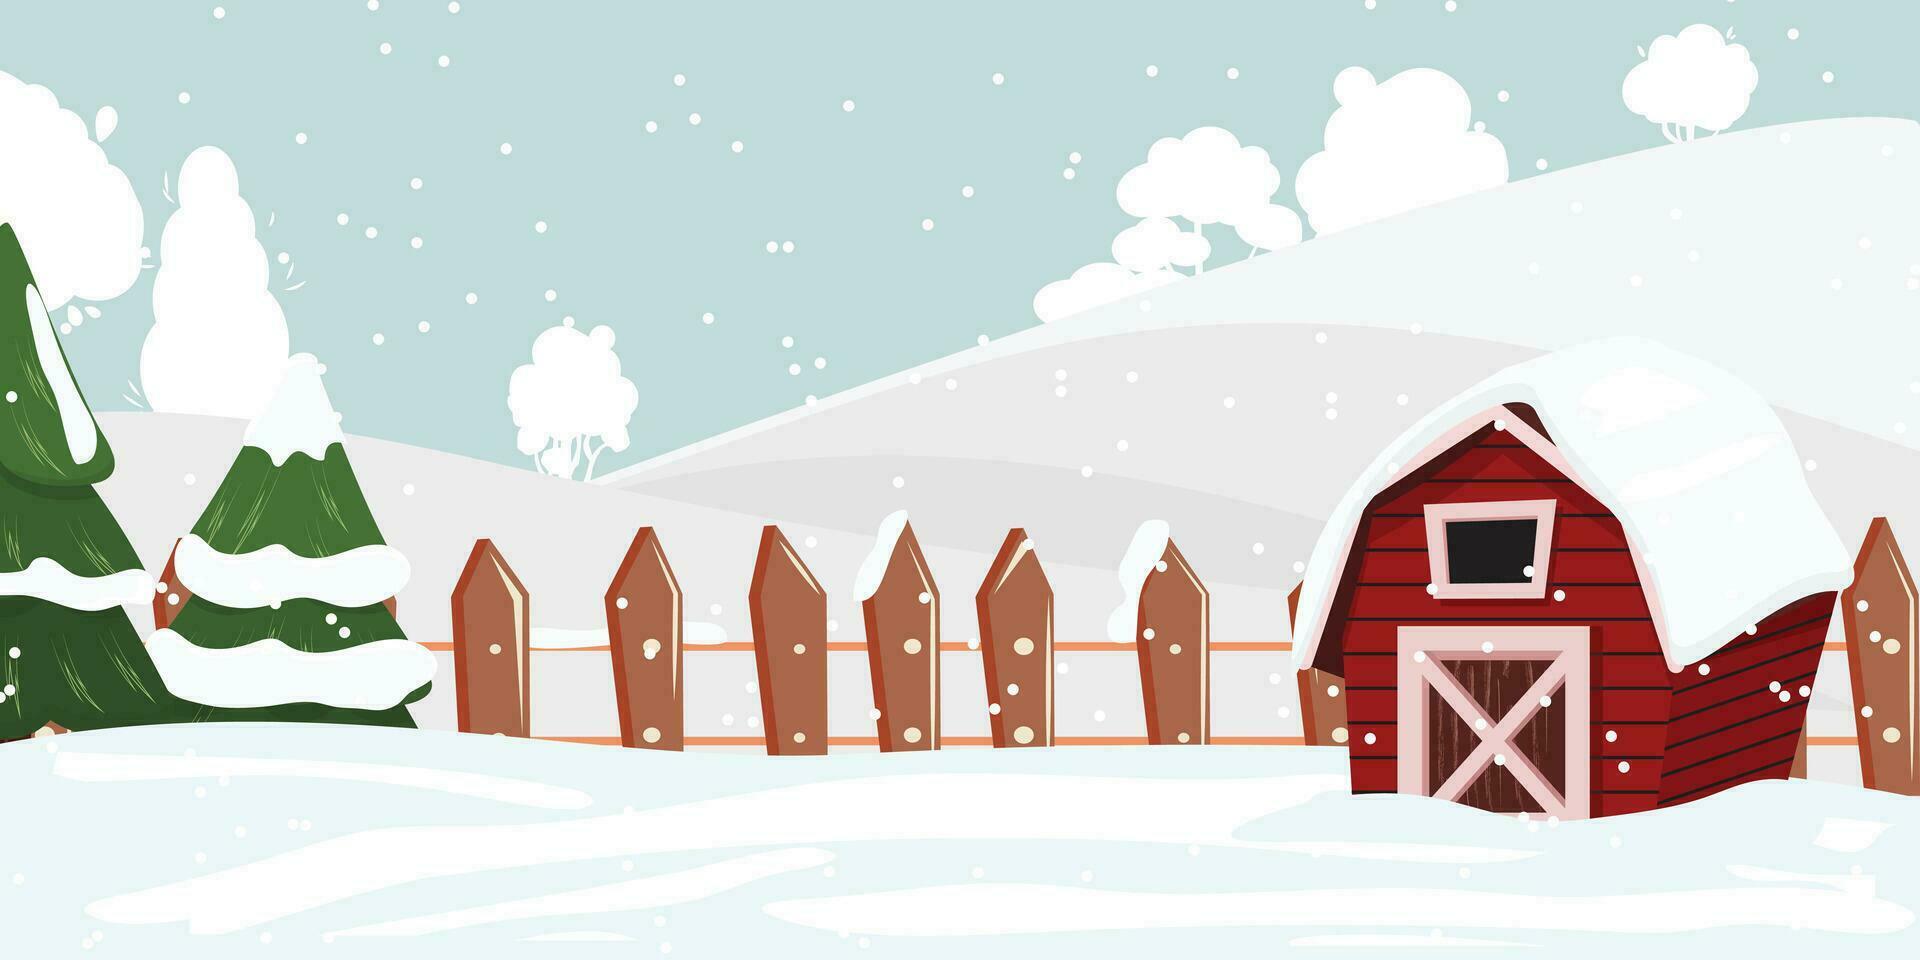 Winter illustration of a red barn in the snow, fir trees. Outdoor snowing vector